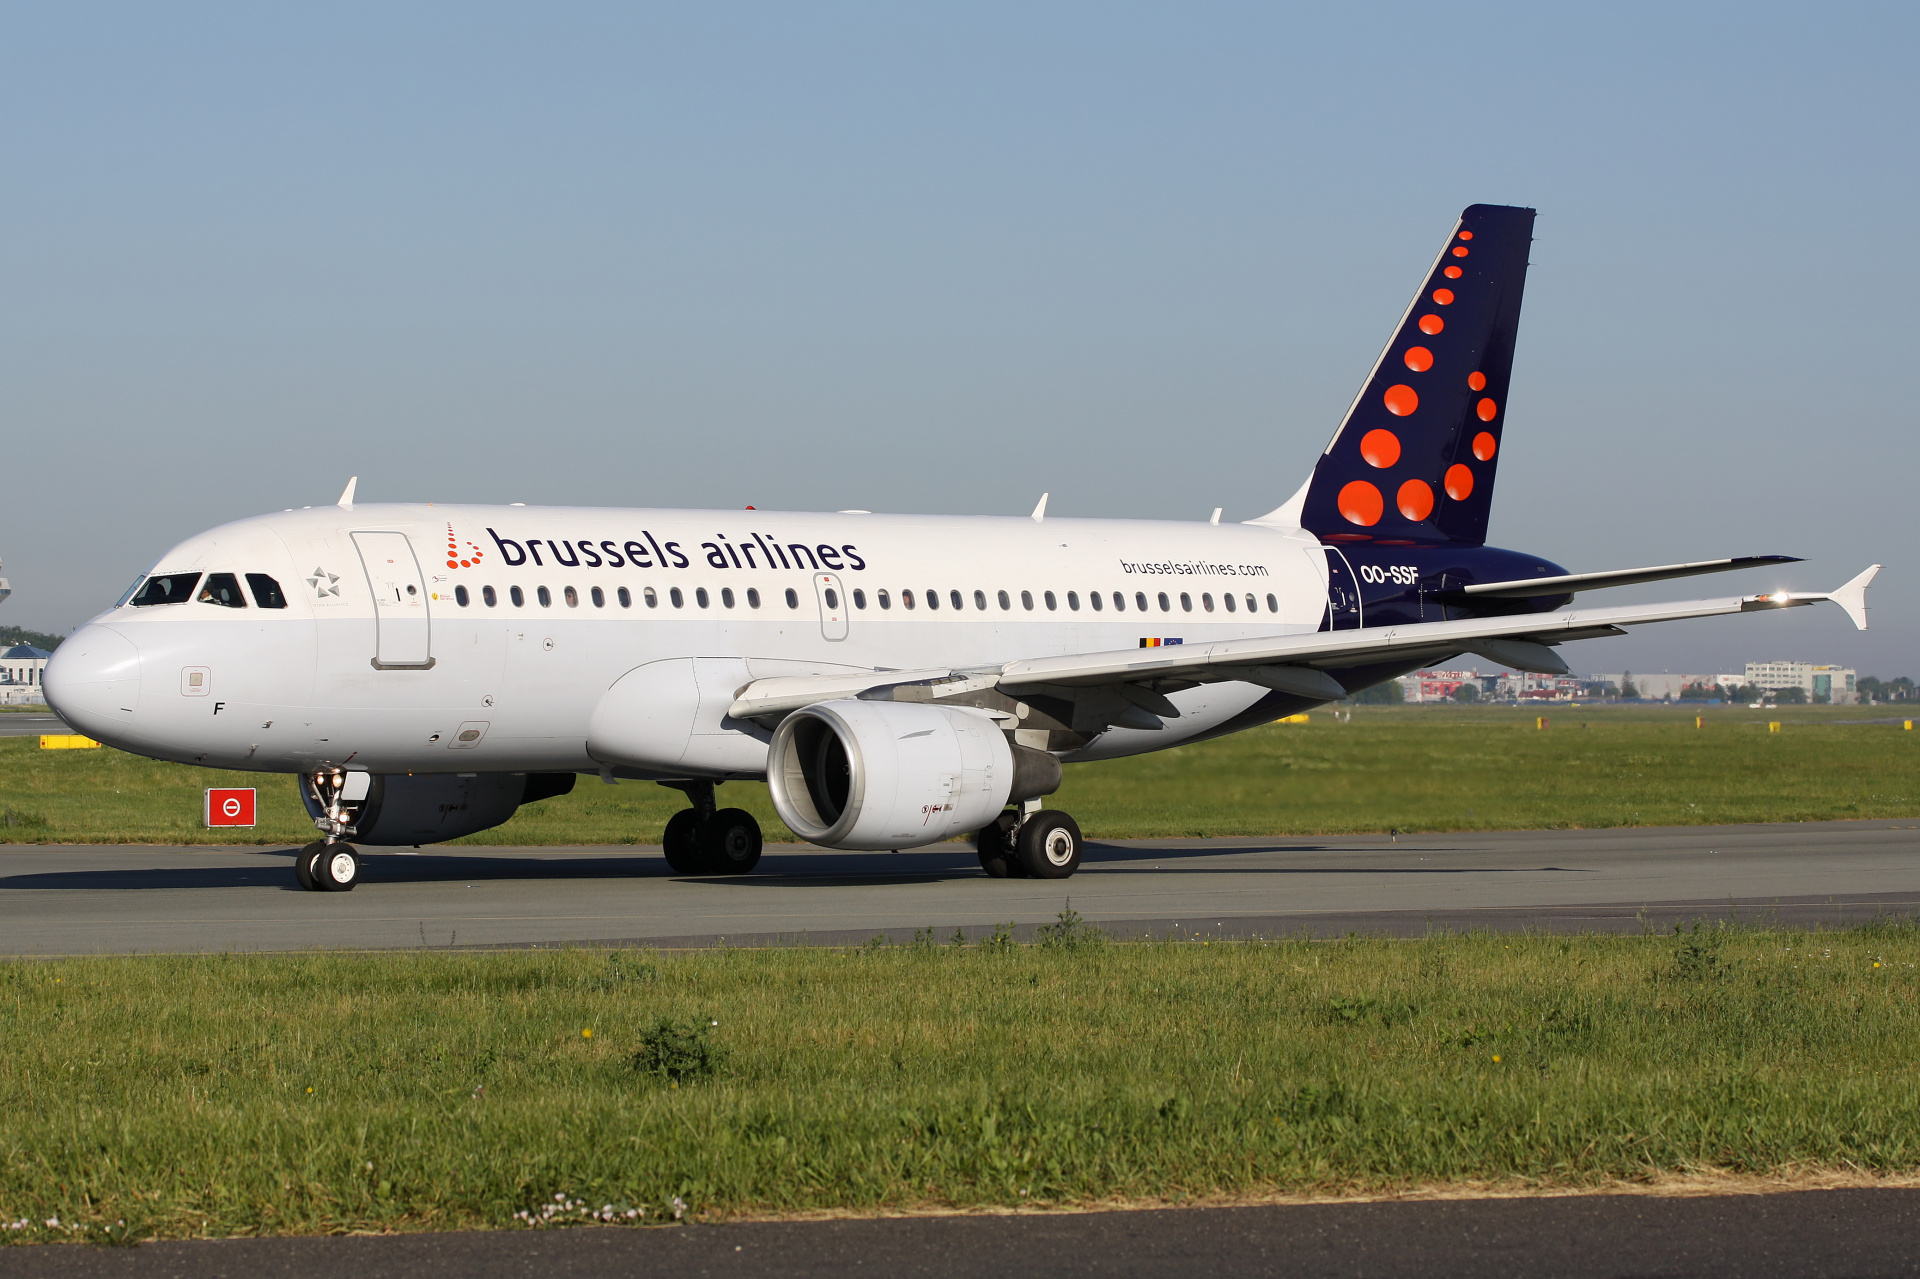 OO-SSF (Samoloty » Spotting na EPWA » Airbus A319-100 » Brussels Airlines)